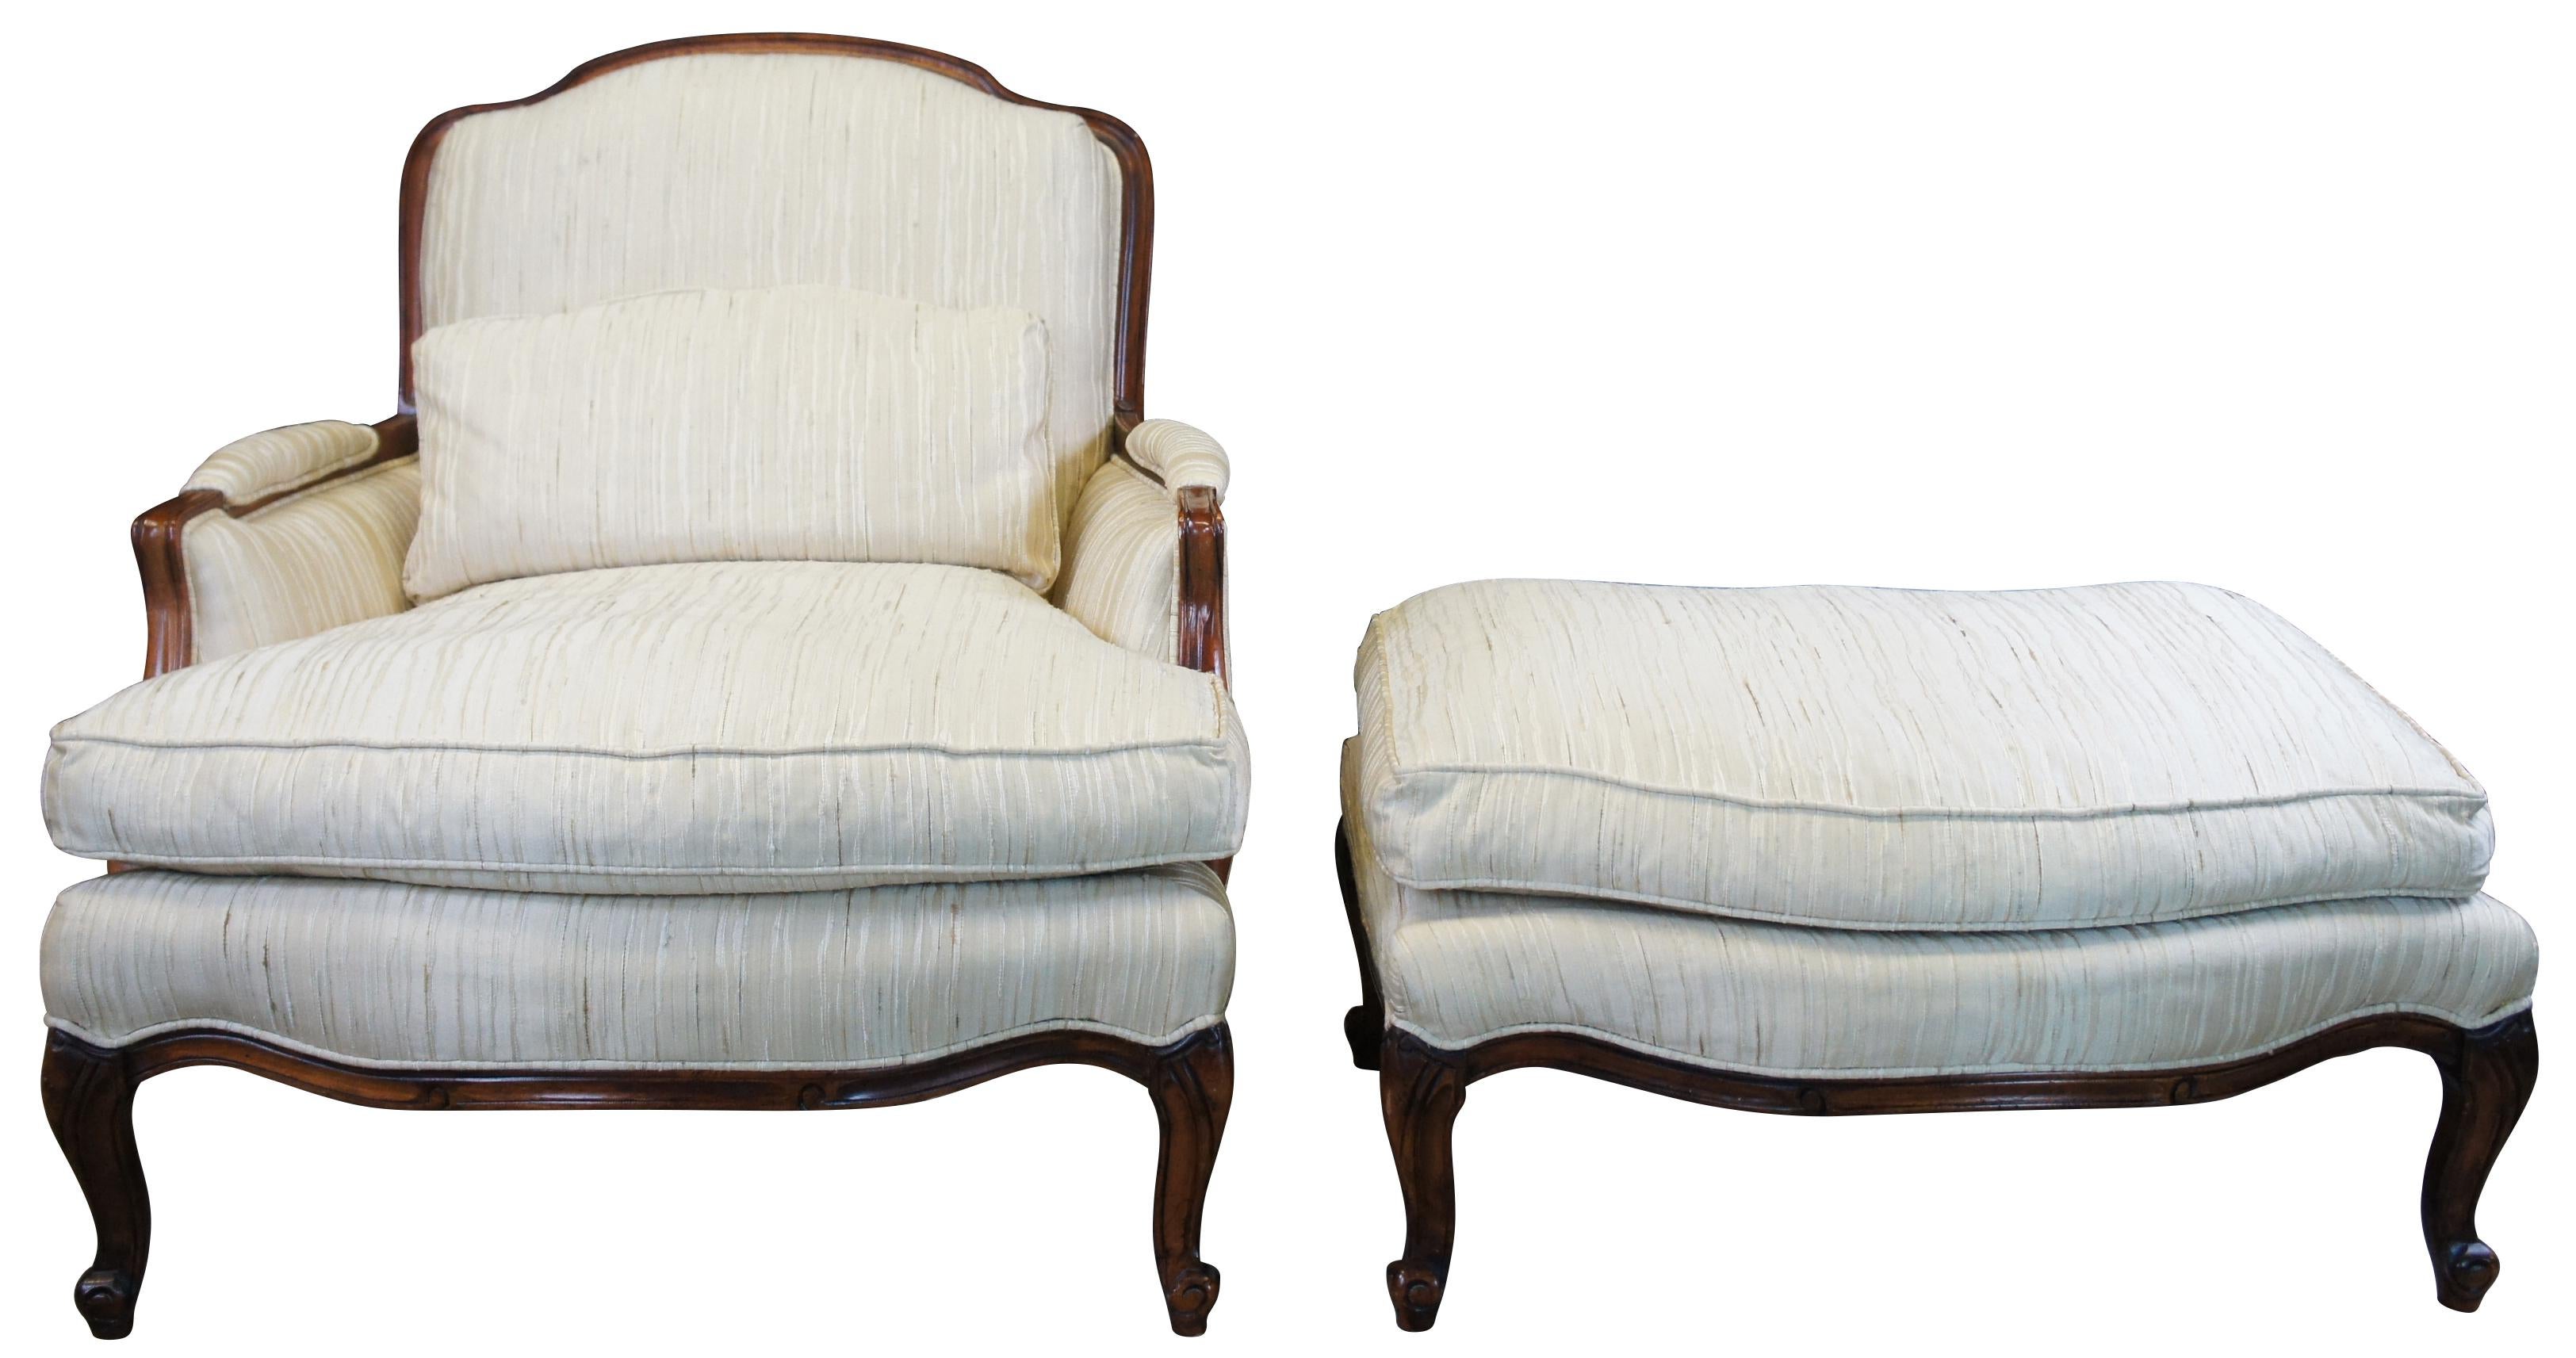 Vintage bergere armchair and ottoman by Sam Moore Furniture Industries of Bedford Virginia, circa 1987. Made of naturally distressed walnut featuring French styling with serpentine form, padded arms and cabriole scrolled feet. Ember Finish, 821